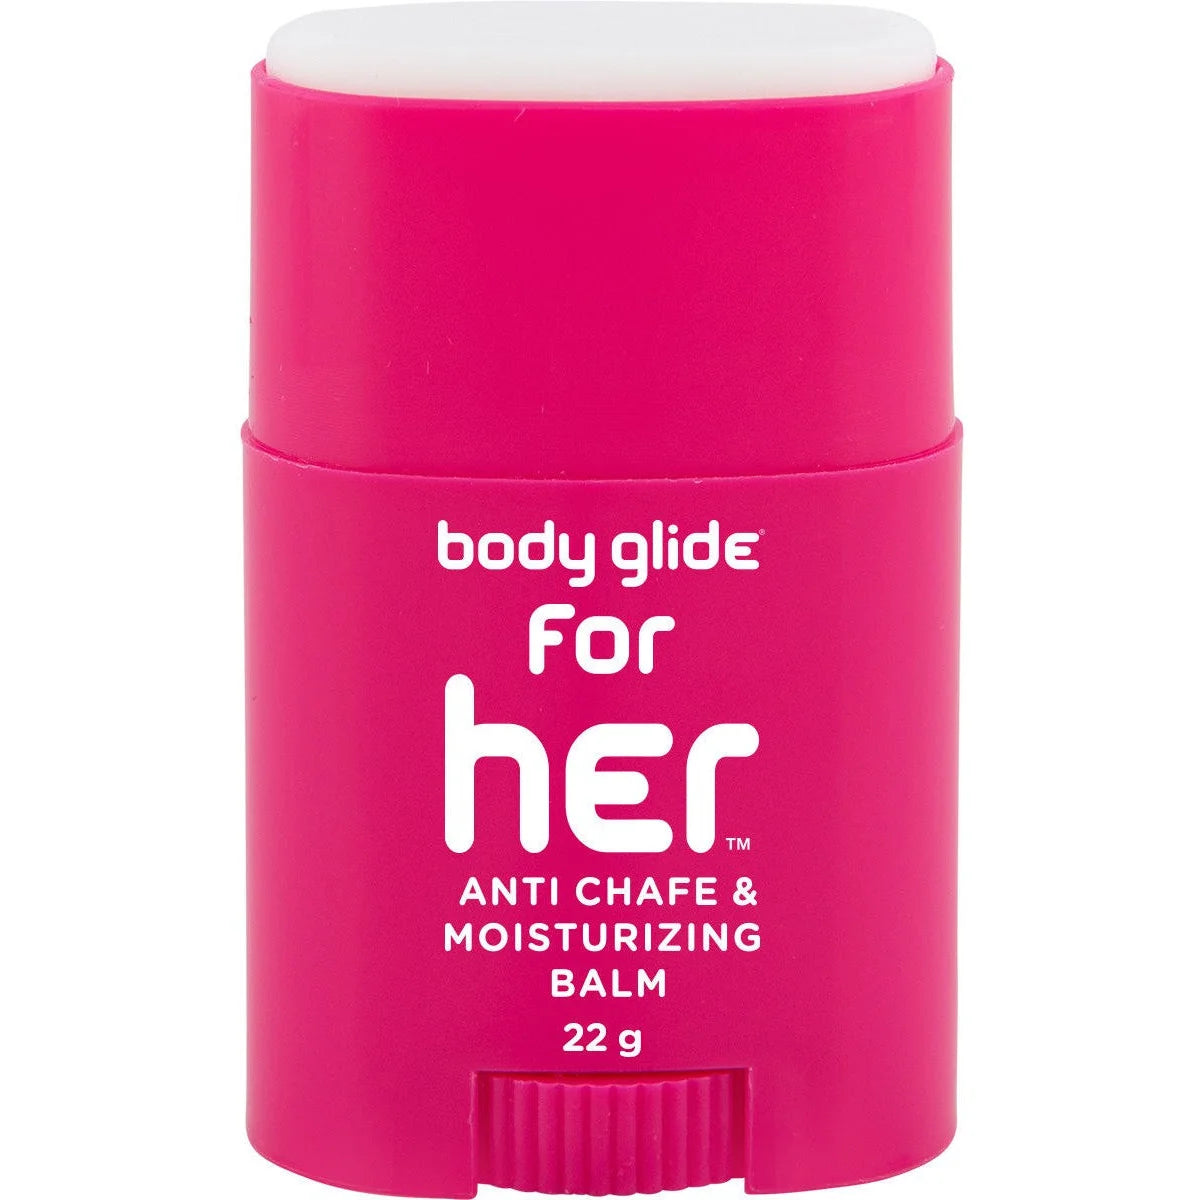 2Pure Body Glide For Her Anti Chafe and Moisturising Balm